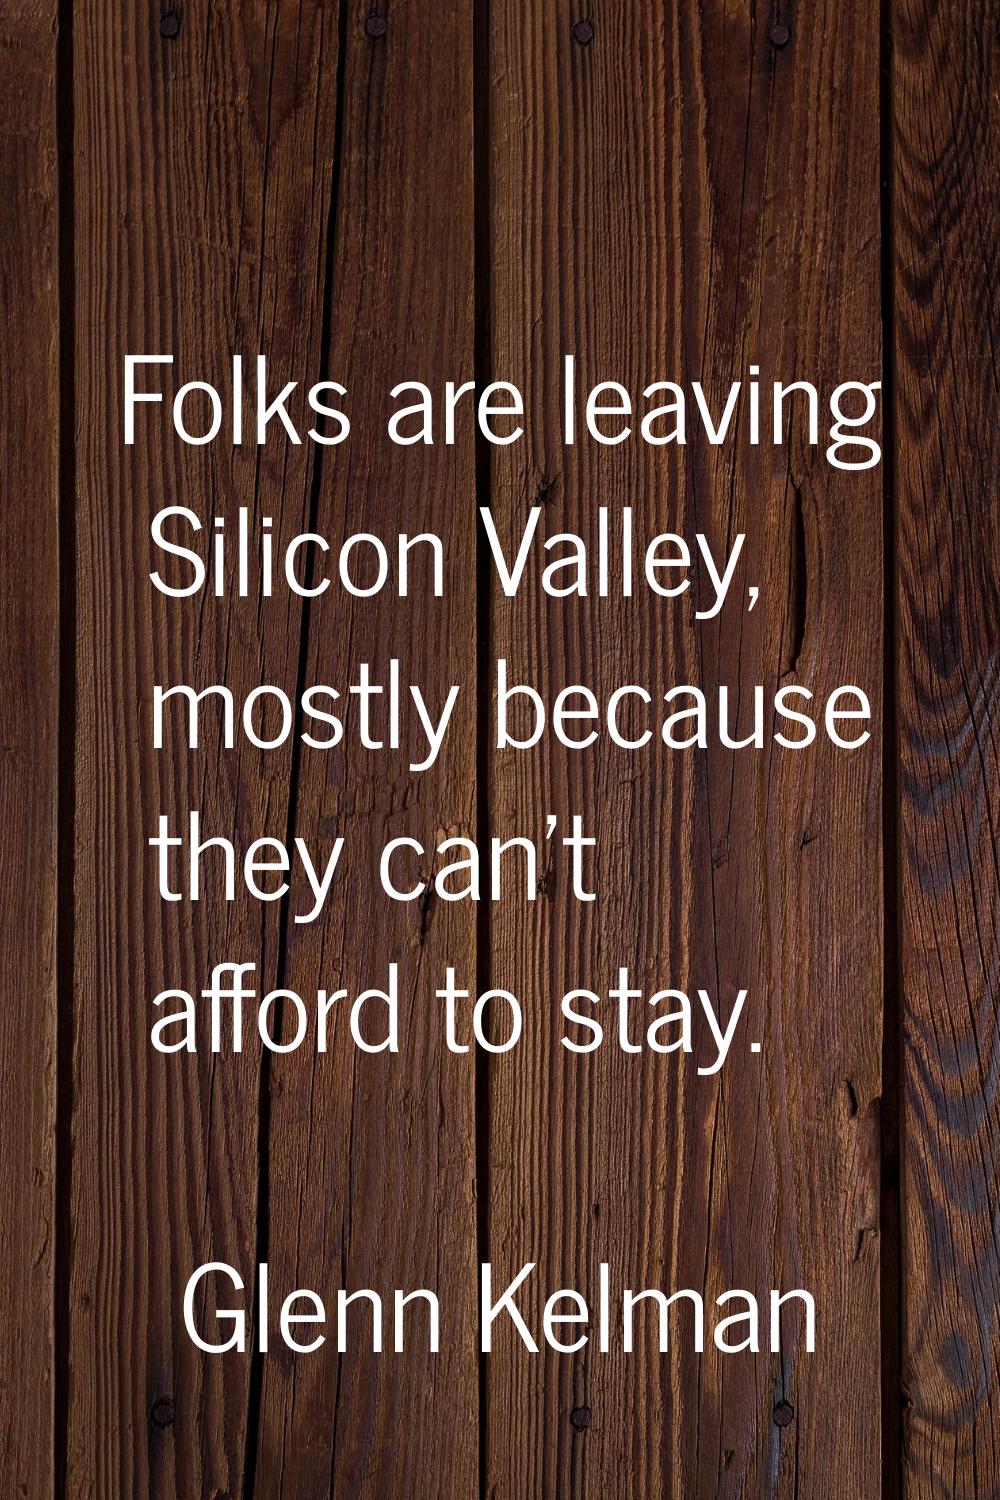 Folks are leaving Silicon Valley, mostly because they can't afford to stay.